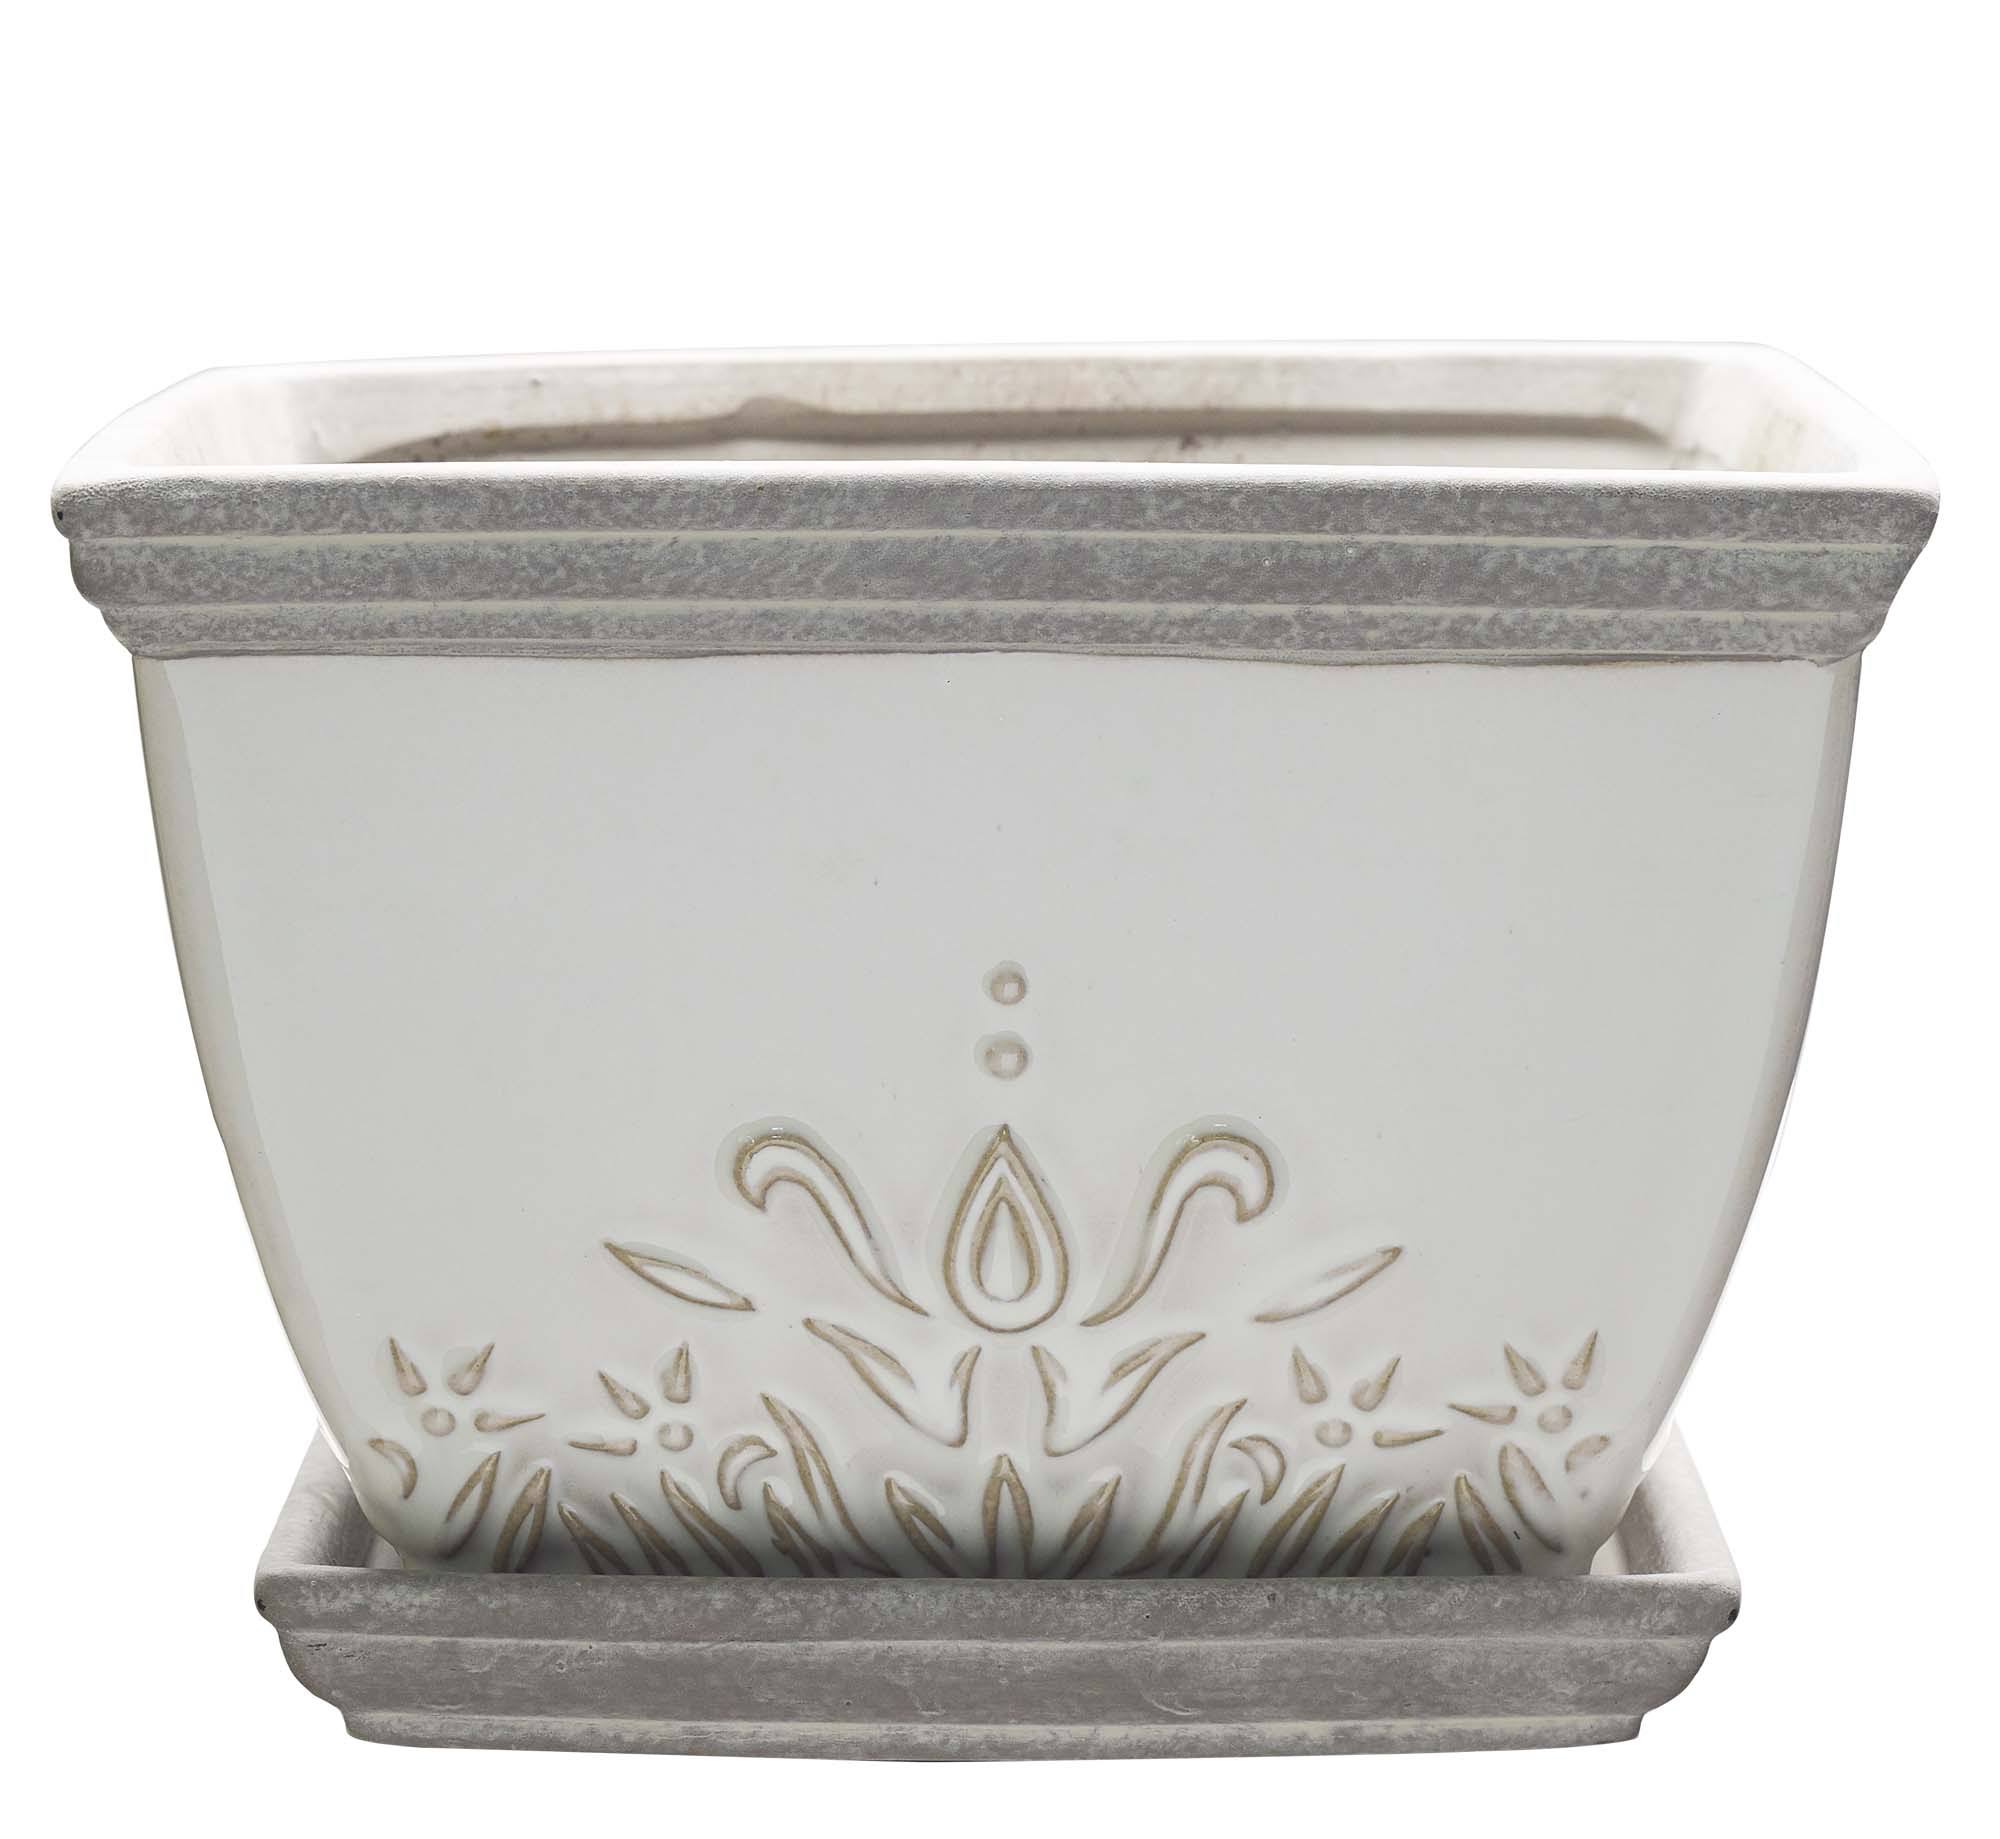 Southern Patio Brentwood 8 in. Ceramic White Planter